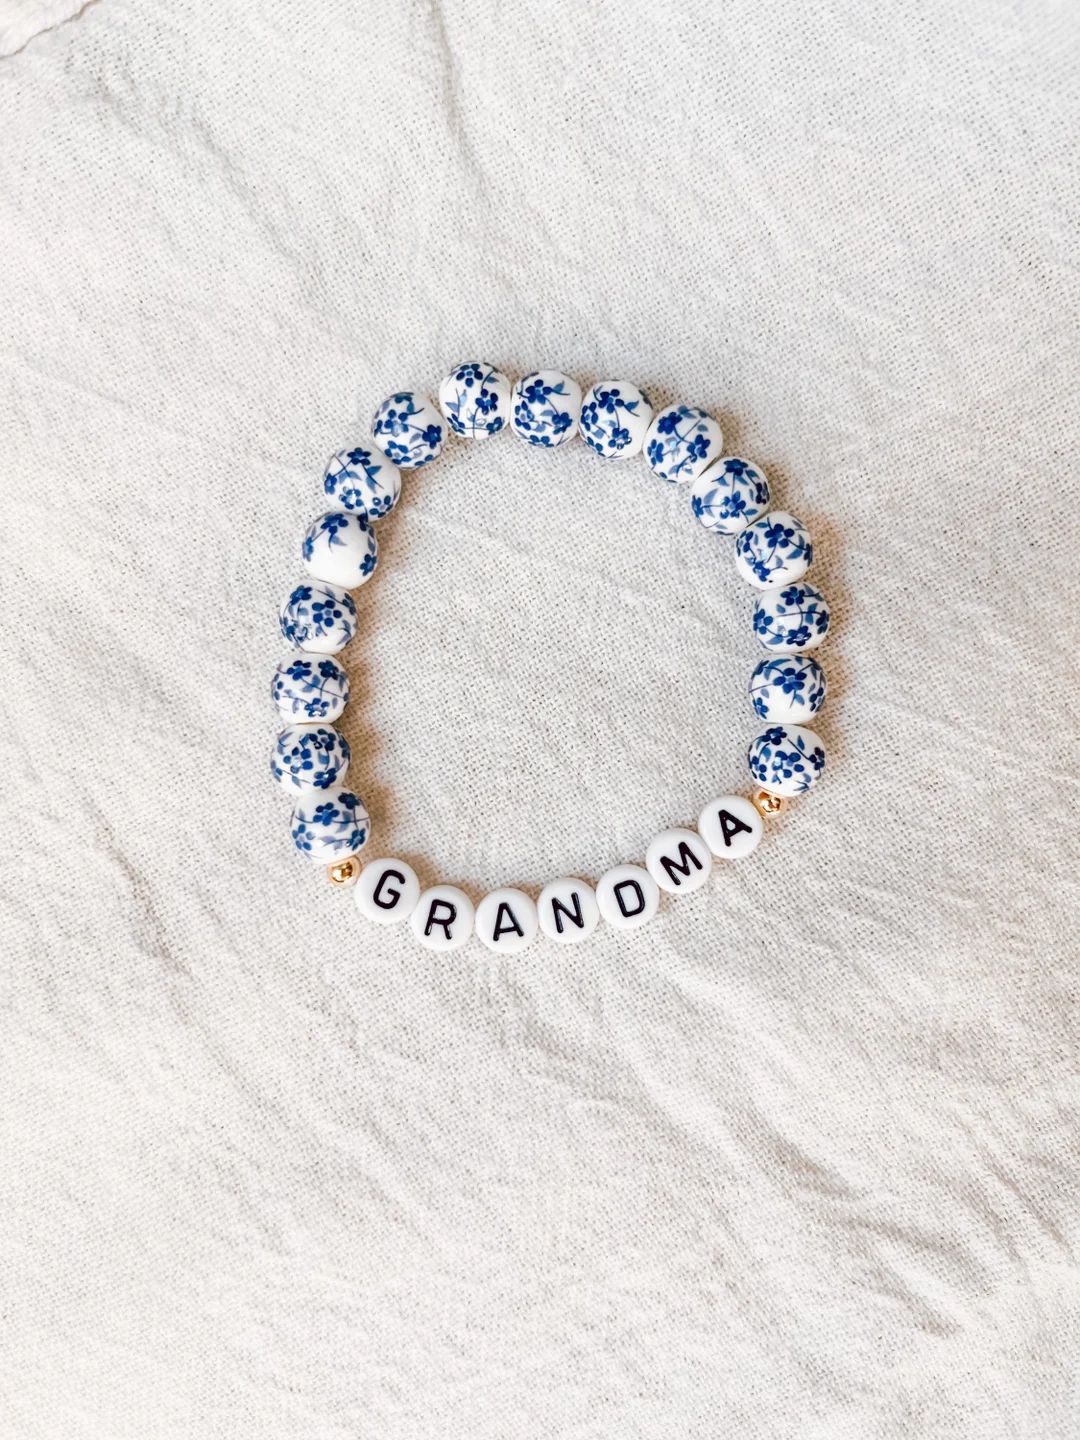 Blue and White Floral Ceramic Personalized Bracelet Mothers Day Present Gift for Grandma - Etsy | Etsy (US)